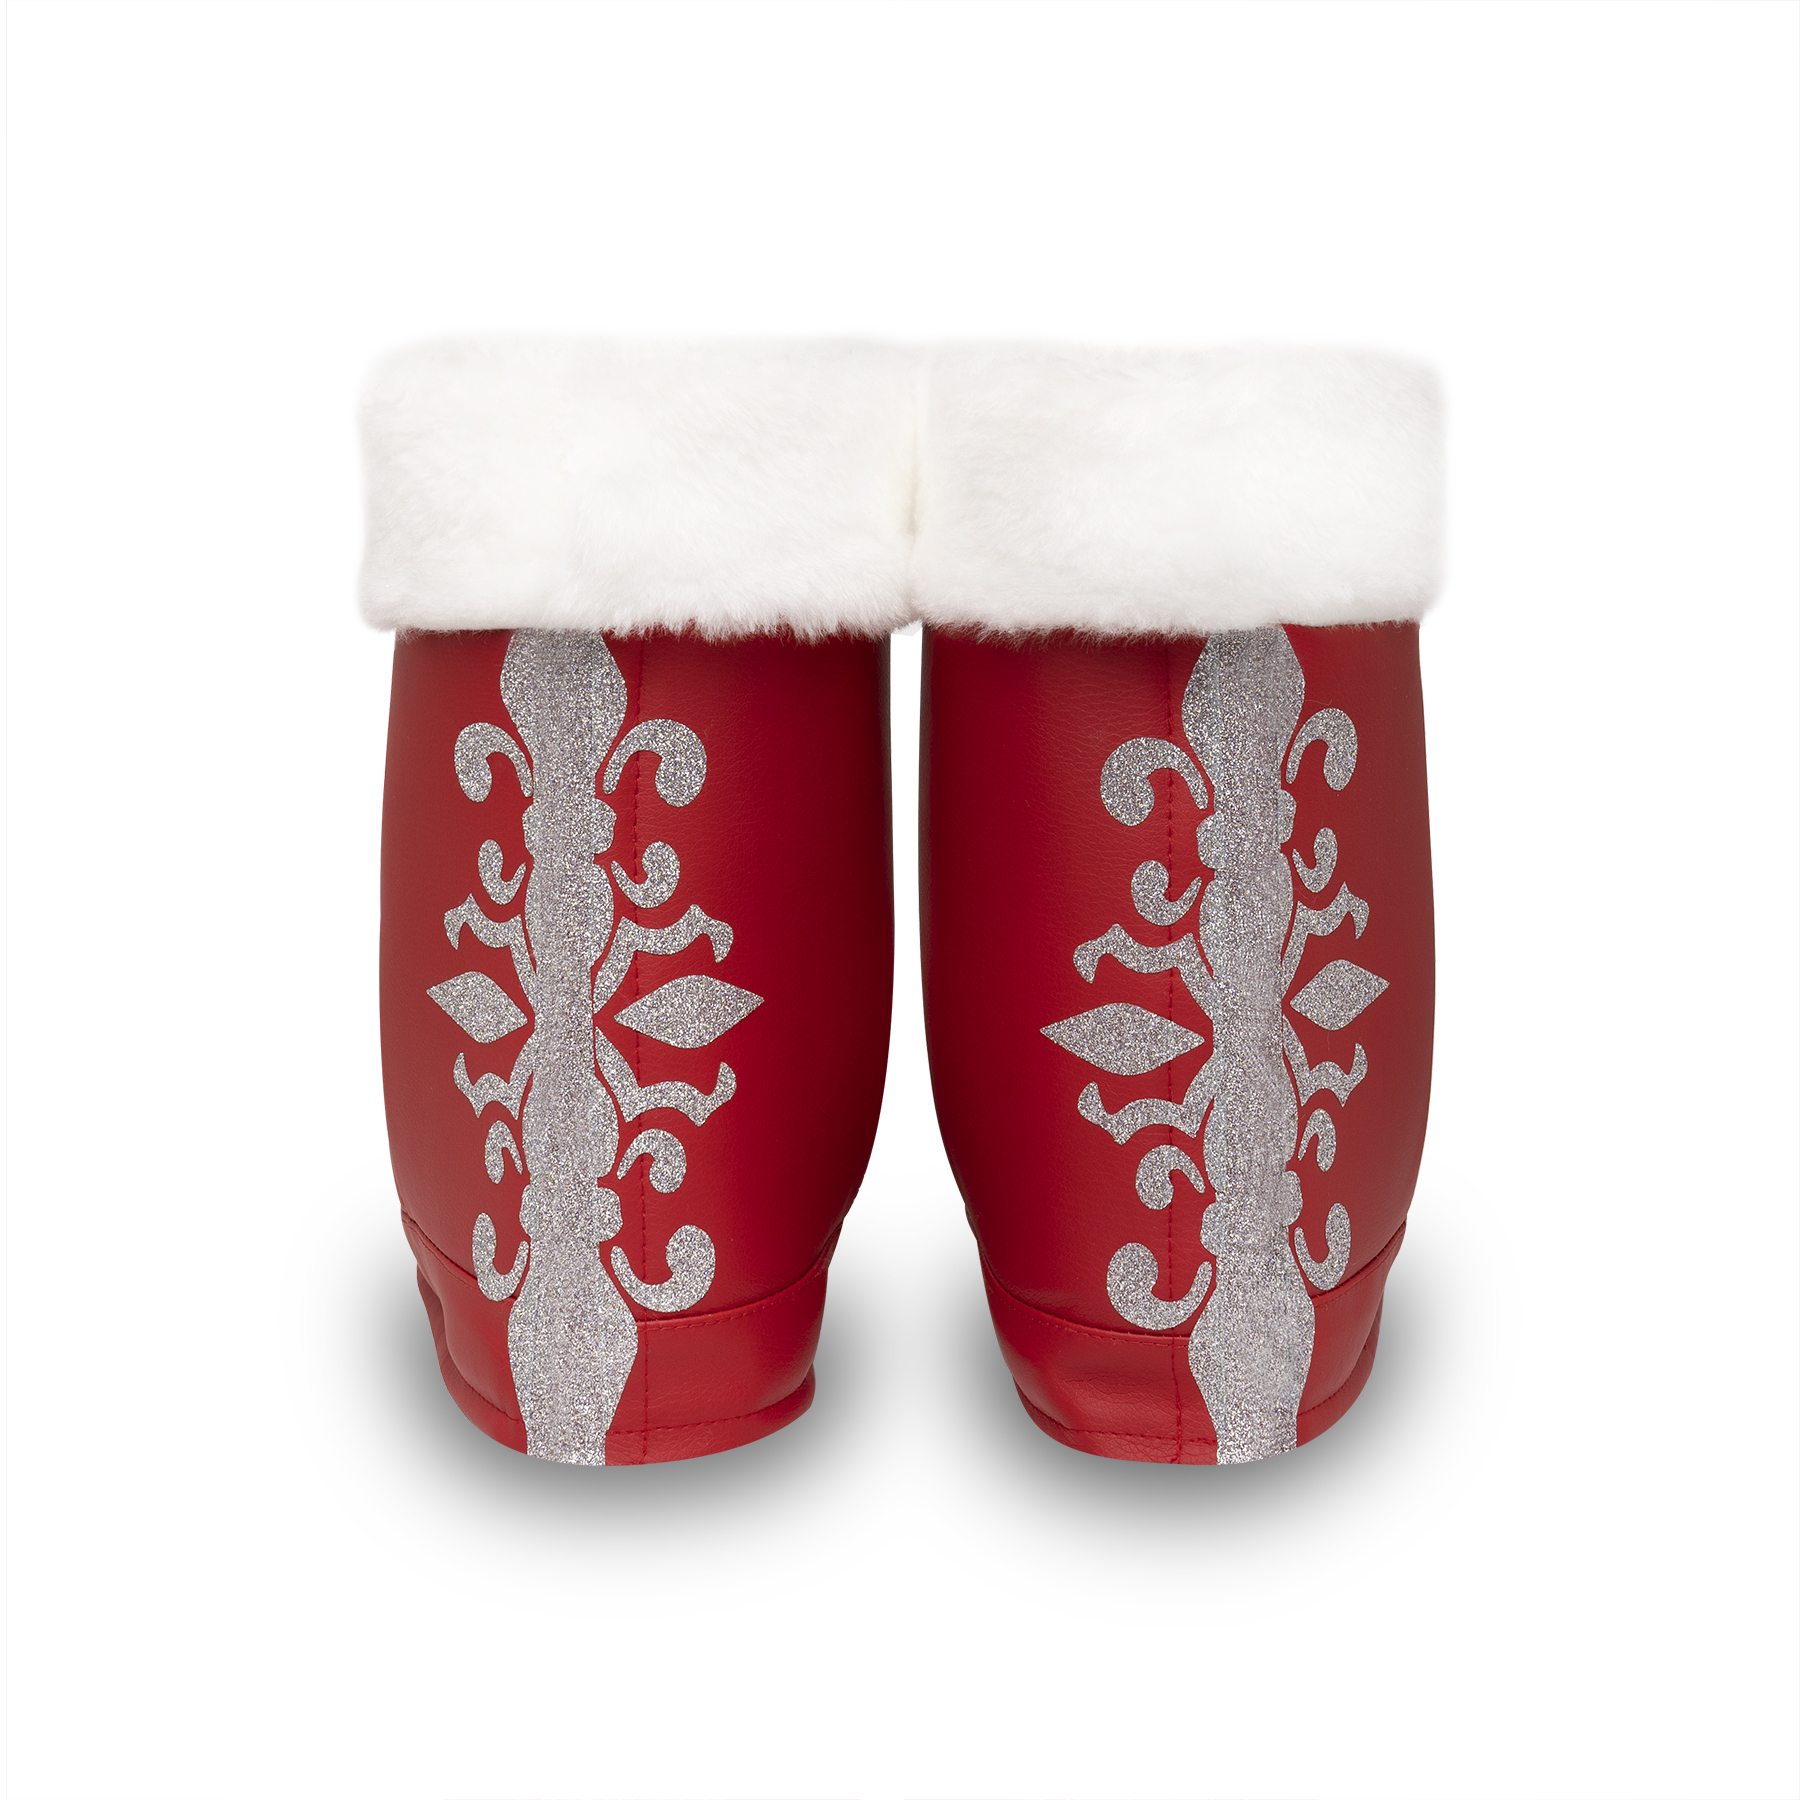 Boot Covers of Santa Claus red with silver